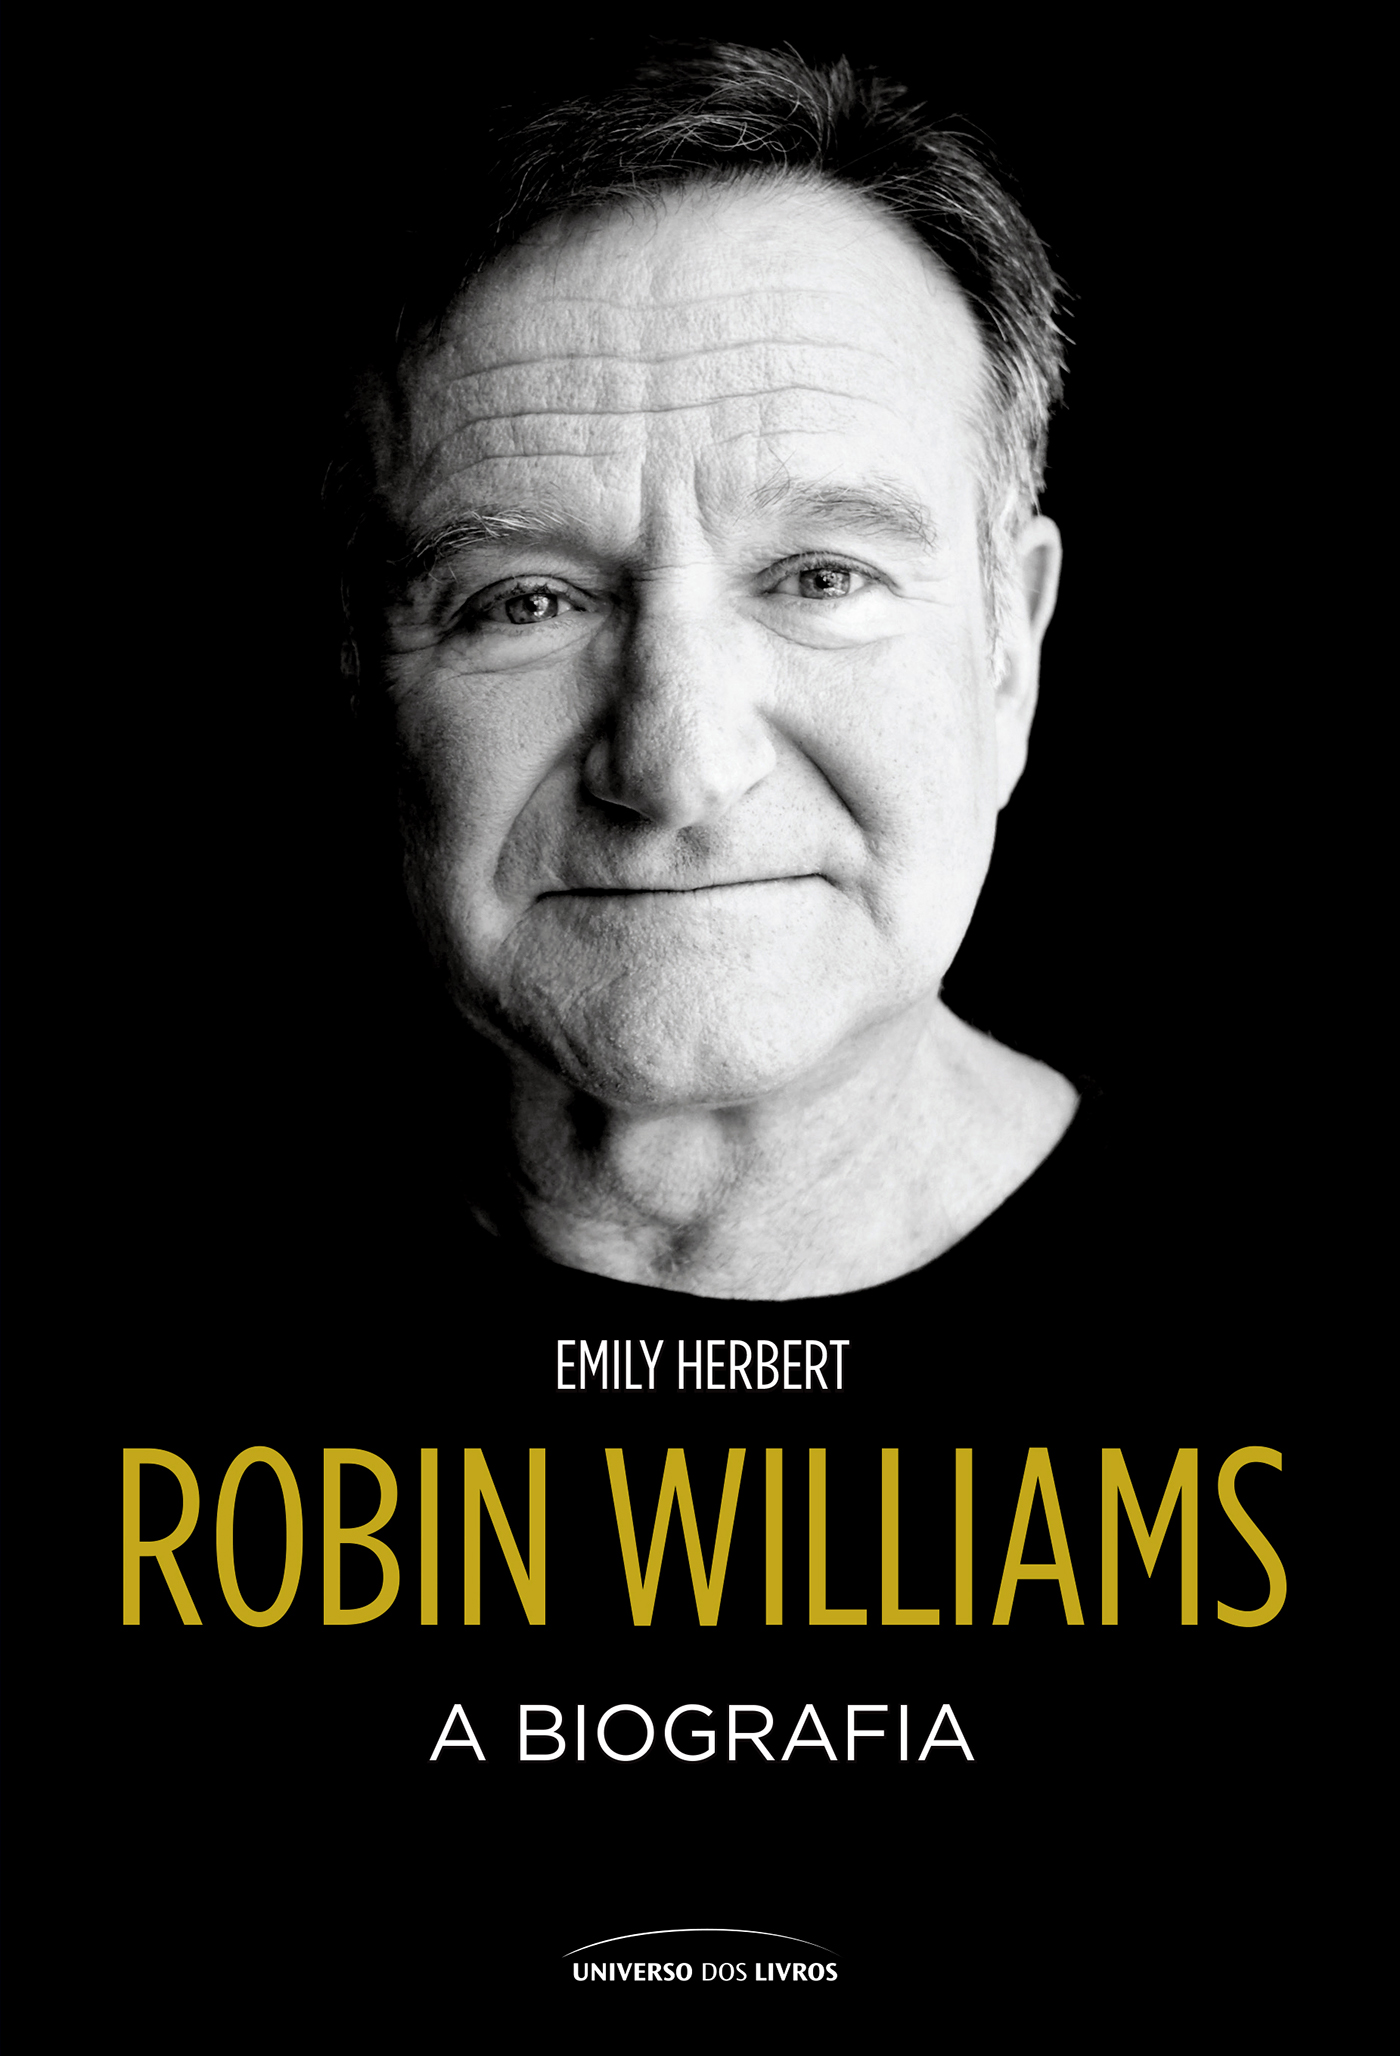 Robin williams comedian Cover Art cover book Cinema hollywood